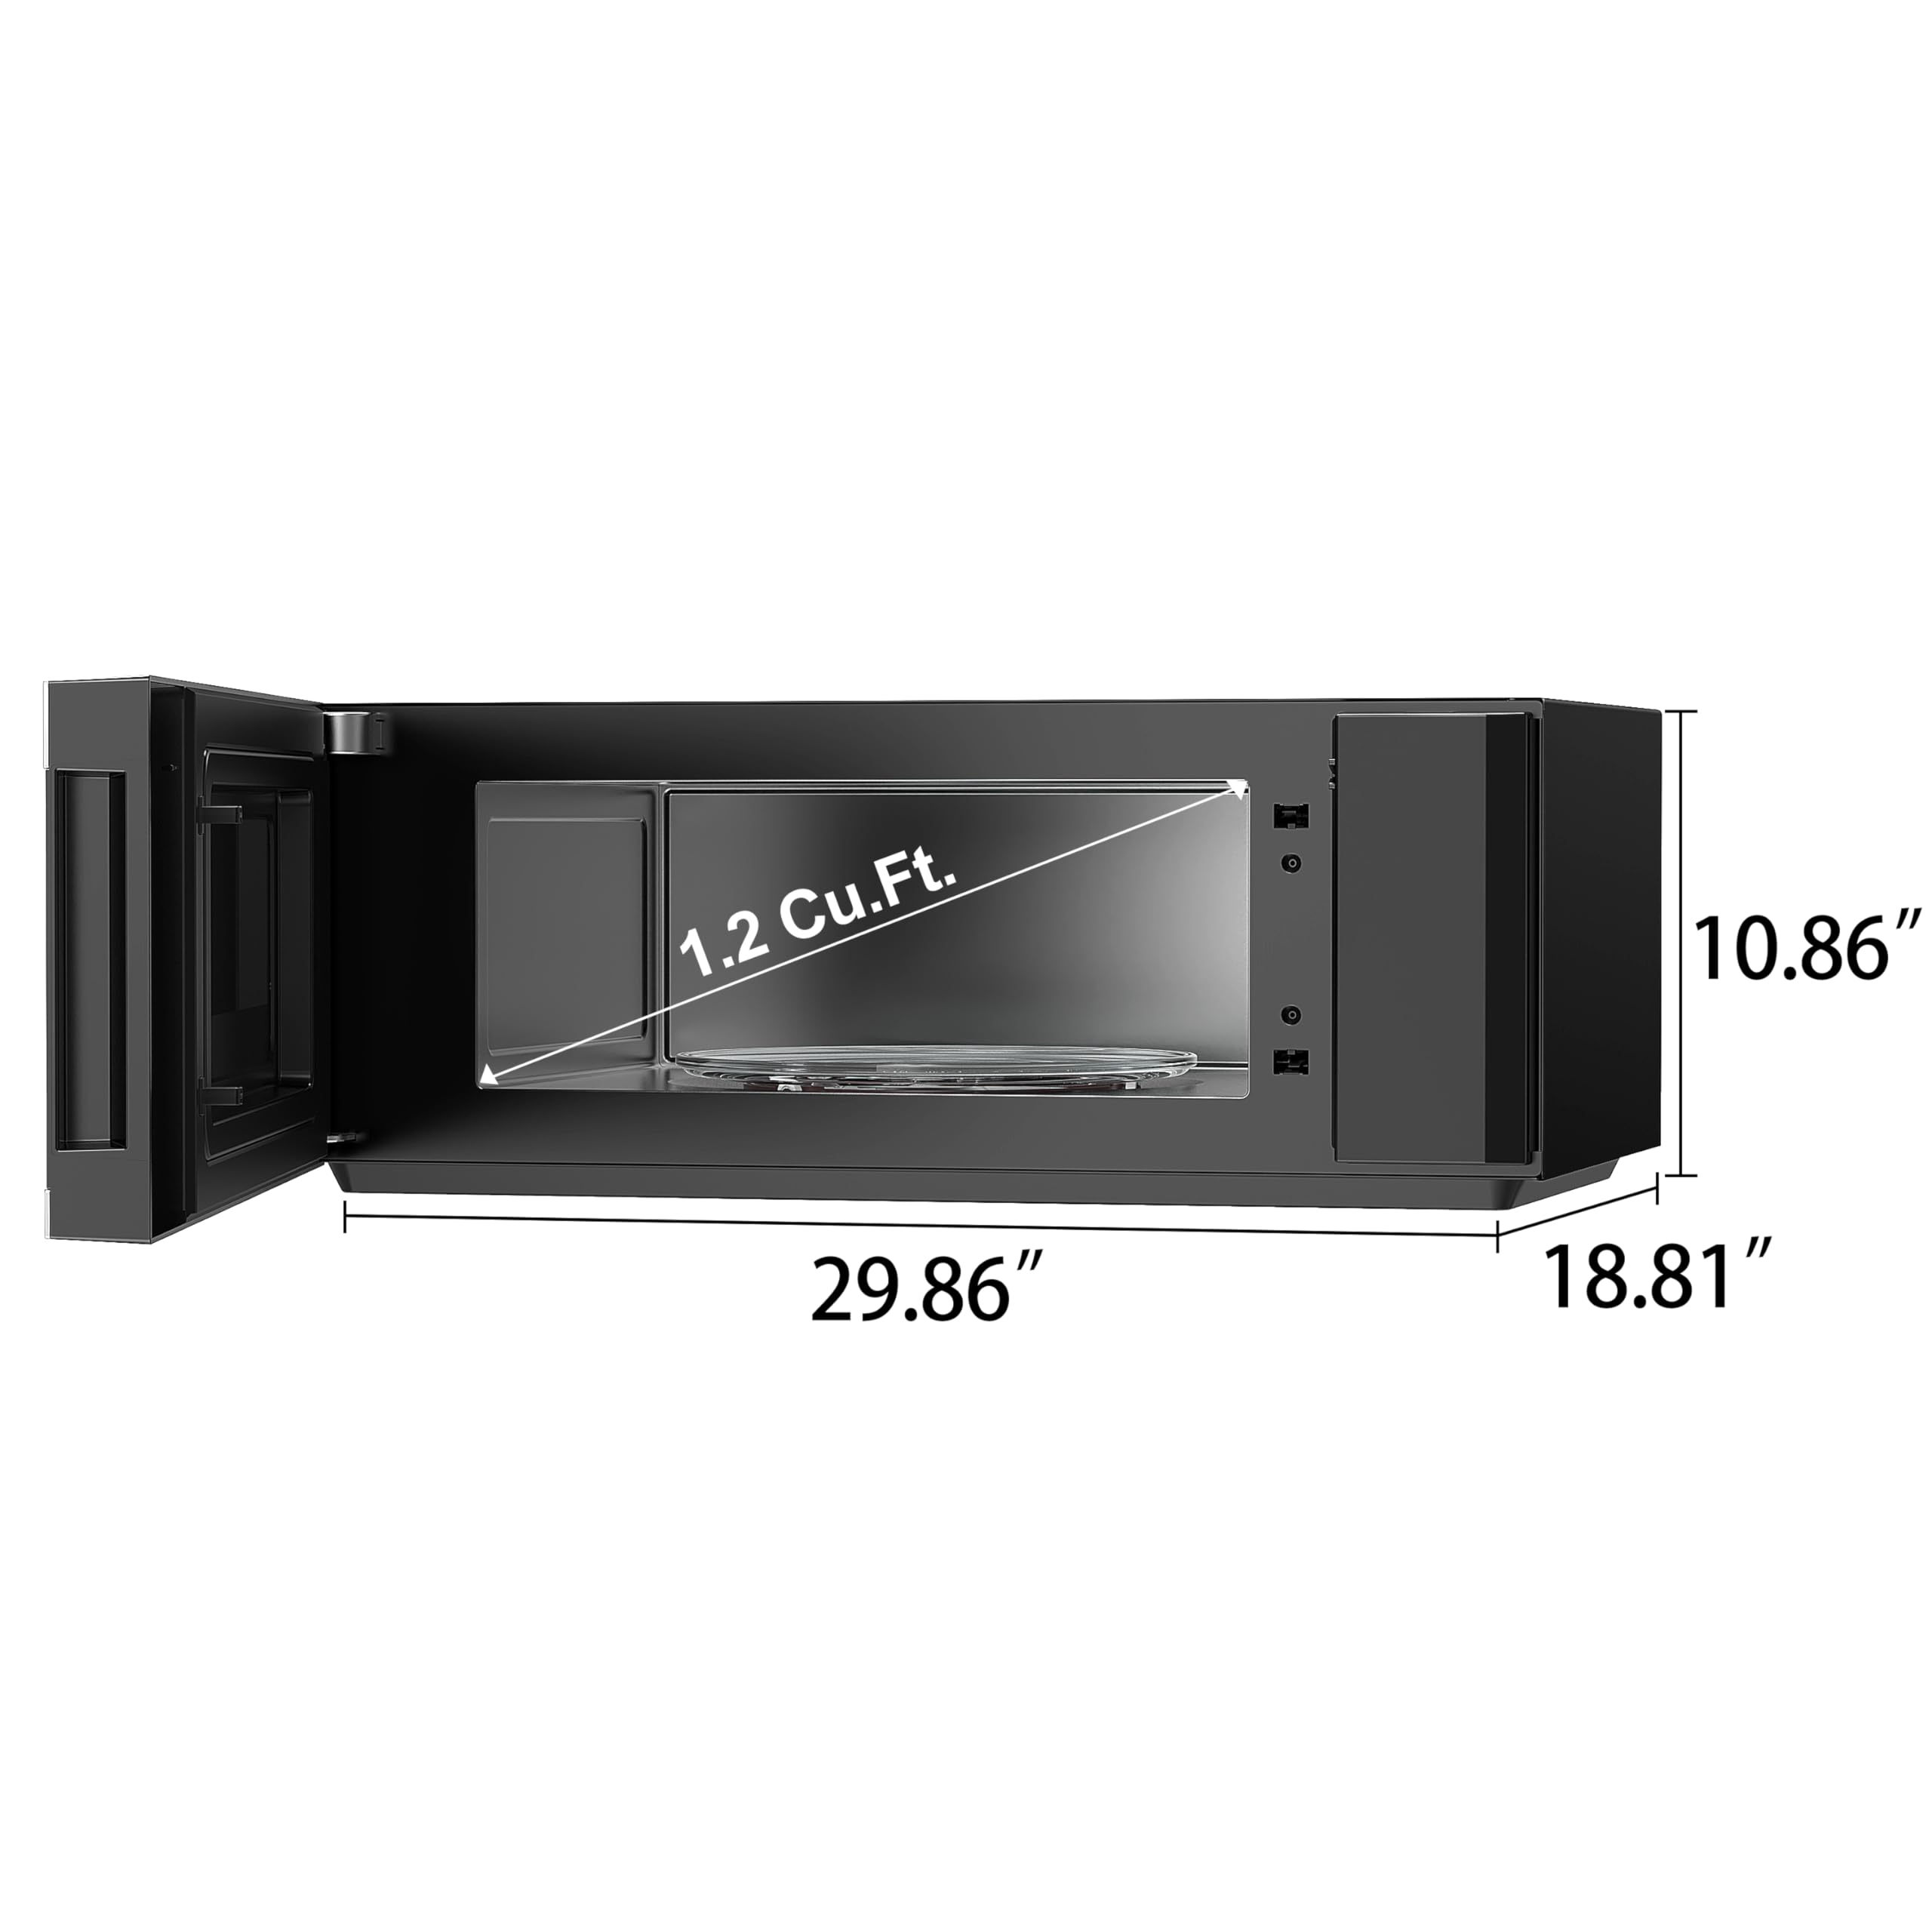 Galanz GLOMJK12S2SWN10 Low Profile Over The Range Microwave Hood Combination Steam & Sensor Cooking, 11 Power Levels, 1.2 Cu Ft, Stainless Steel